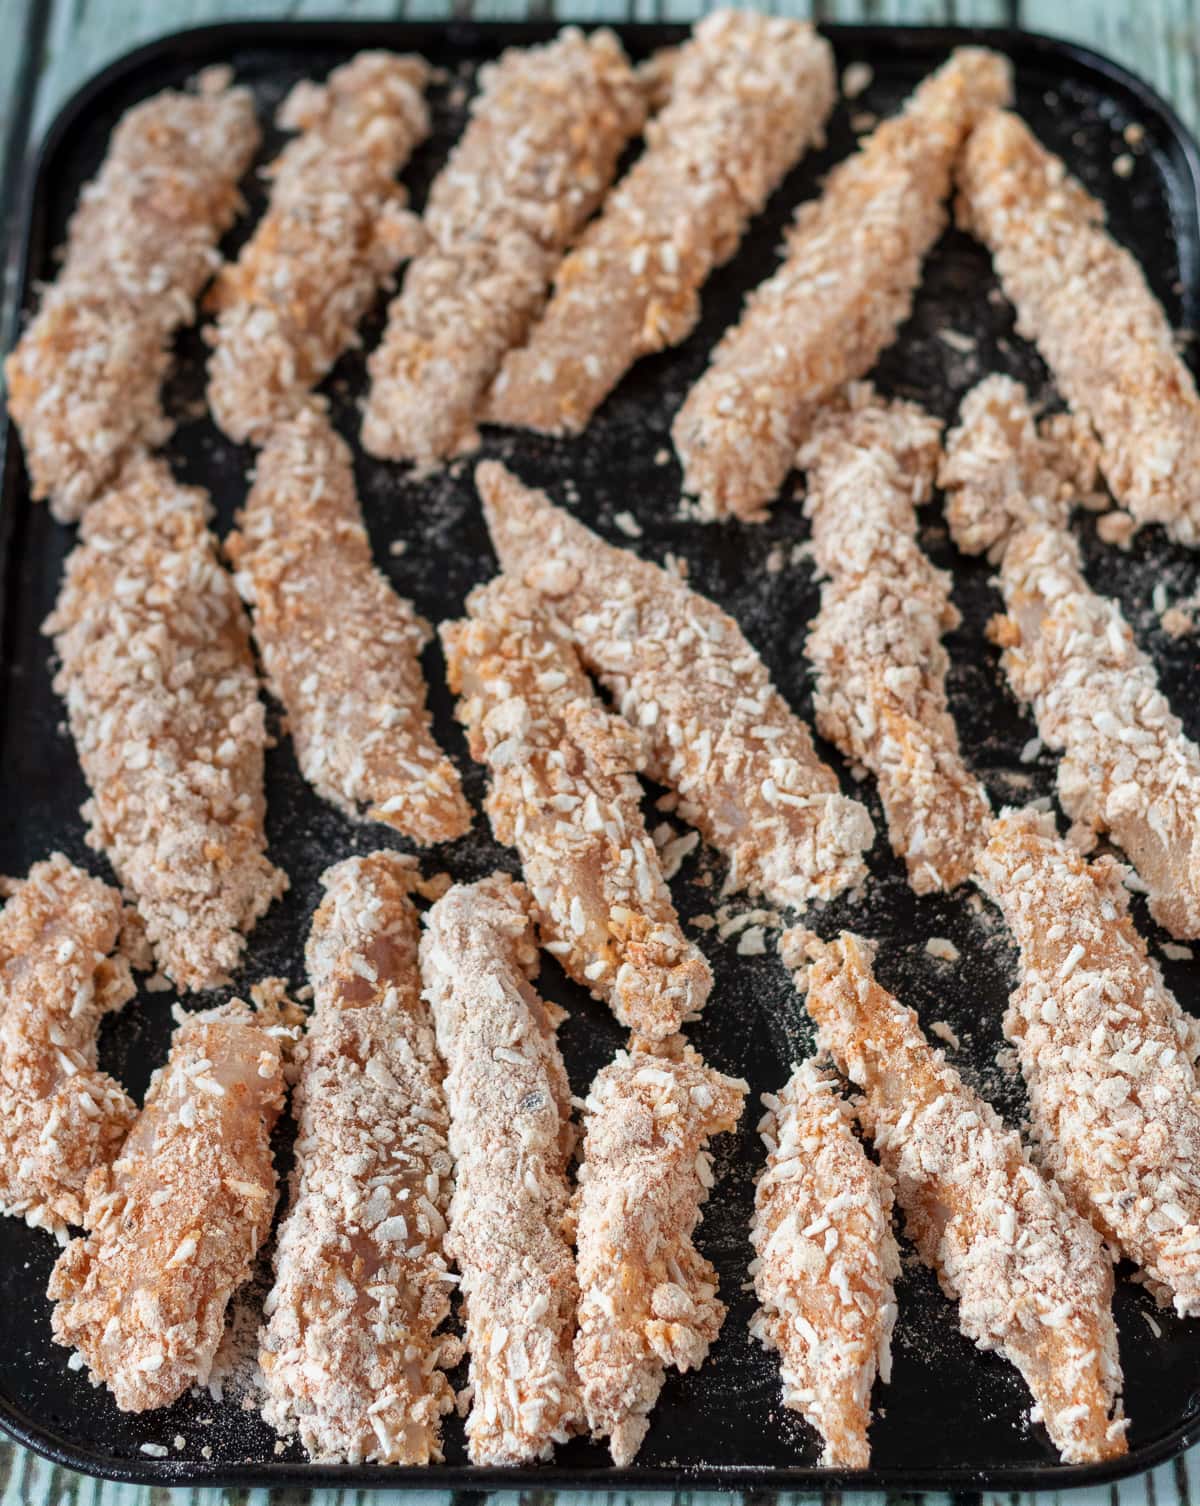 Chicken tenders coated in breadcrumb mix on a baking tray.